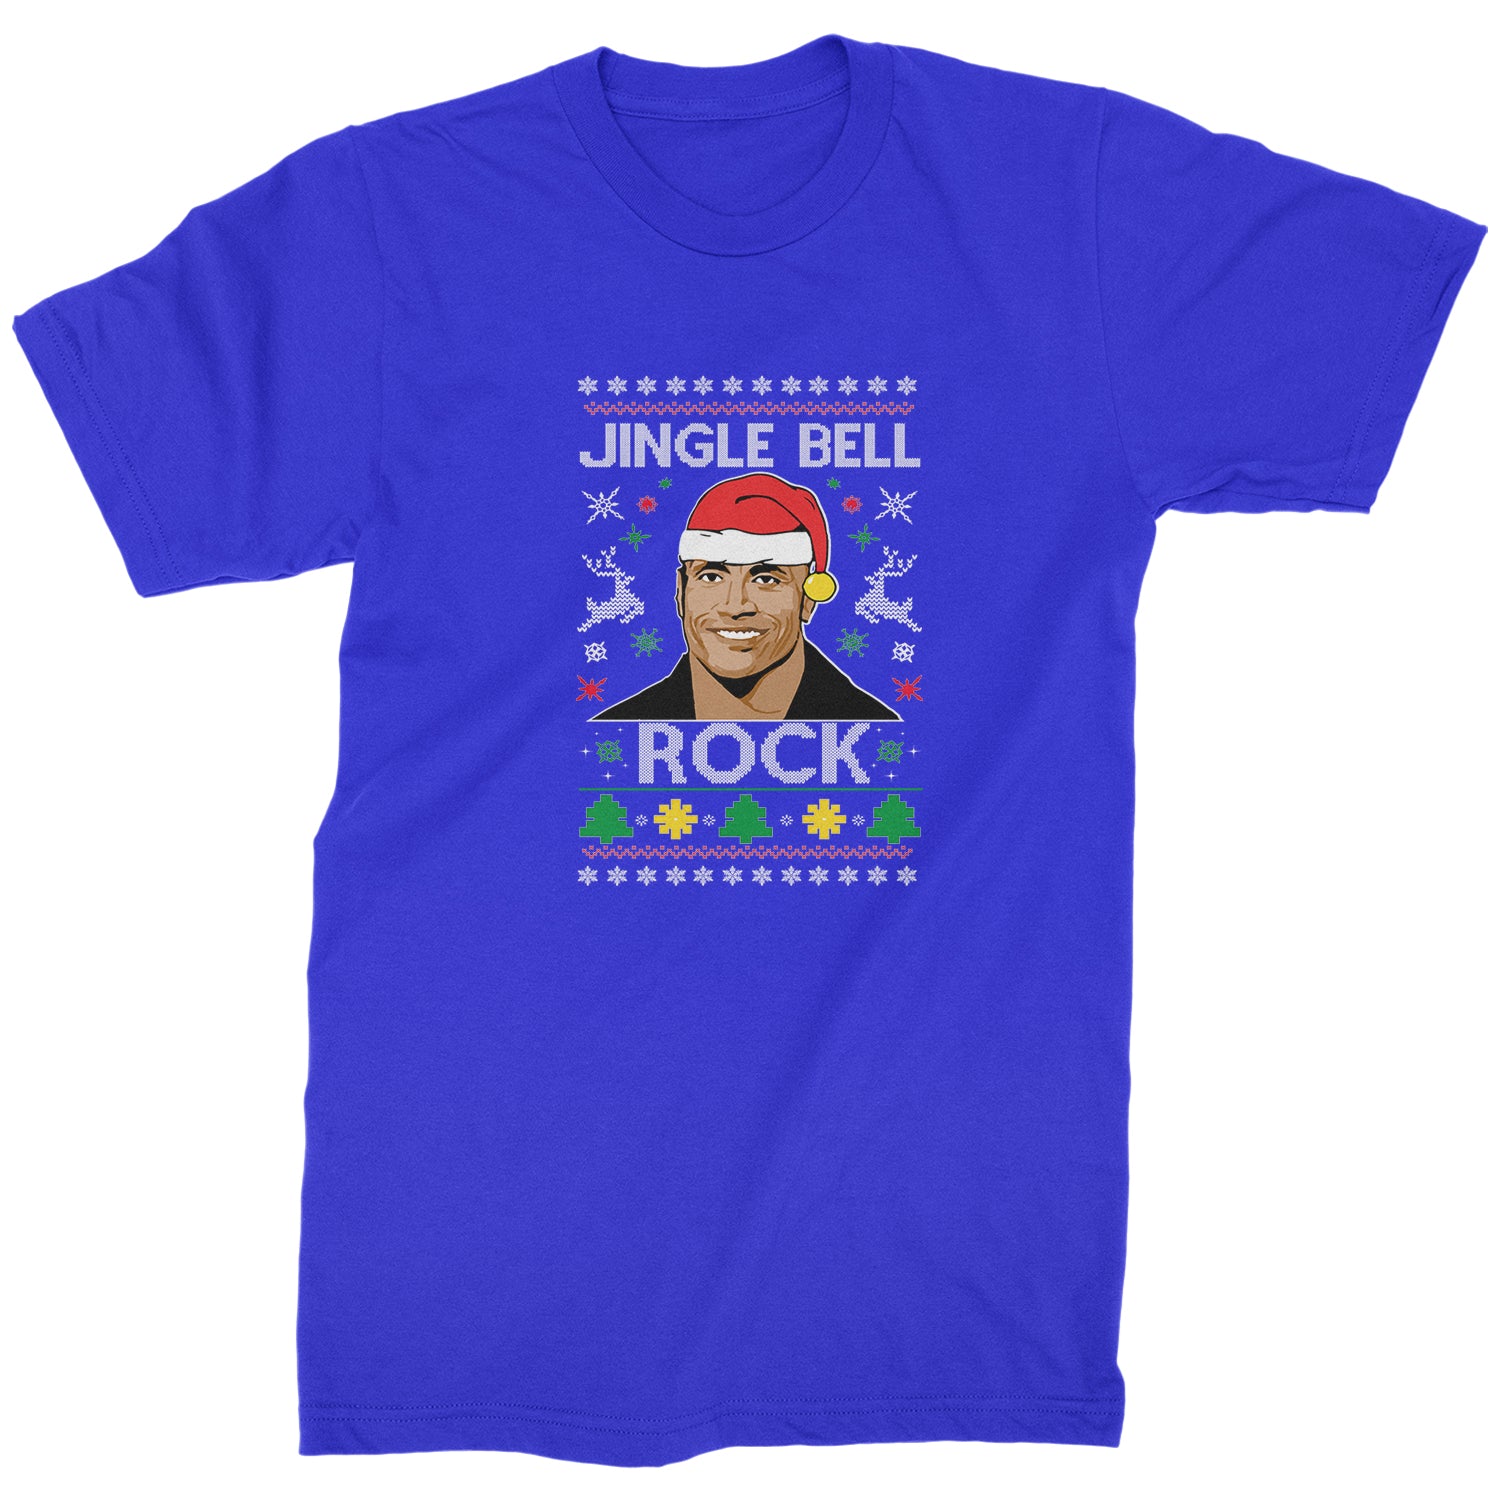 Jingle Bell Rock Ugly Christmas Mens T-shirt 2018, champ, Christmas, dwayne, johnson, peoples, rock, Sweatshirts, the, Ugly by Expression Tees